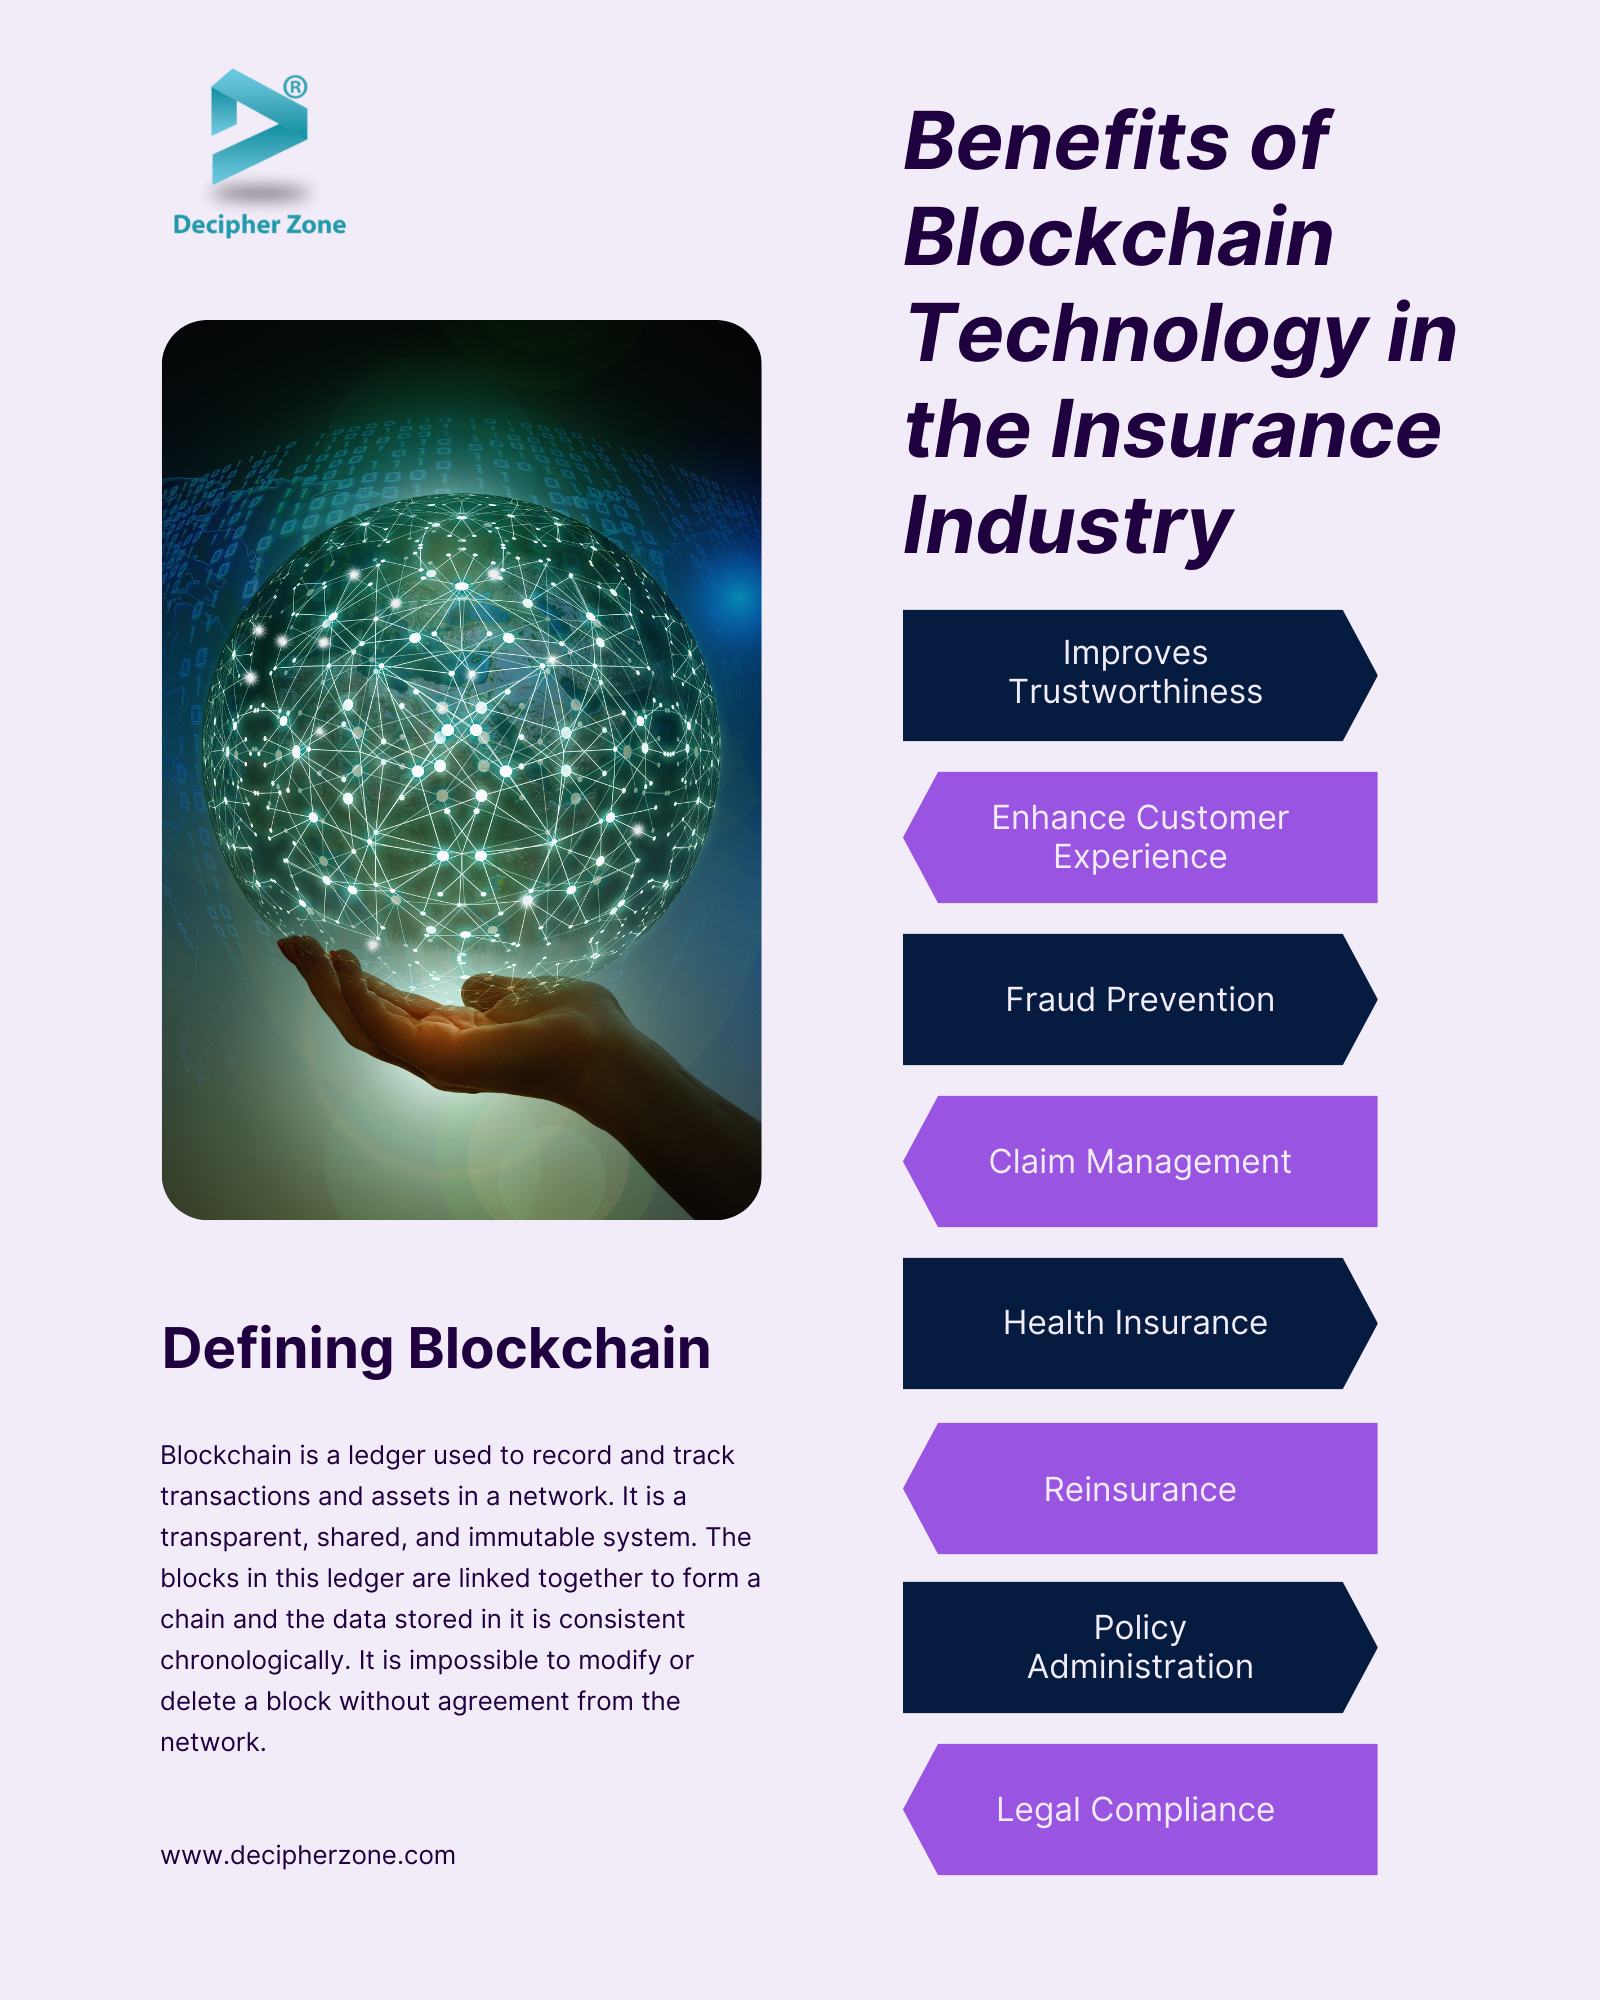 Benefits of Blockchain Technology in the Insurance Industry